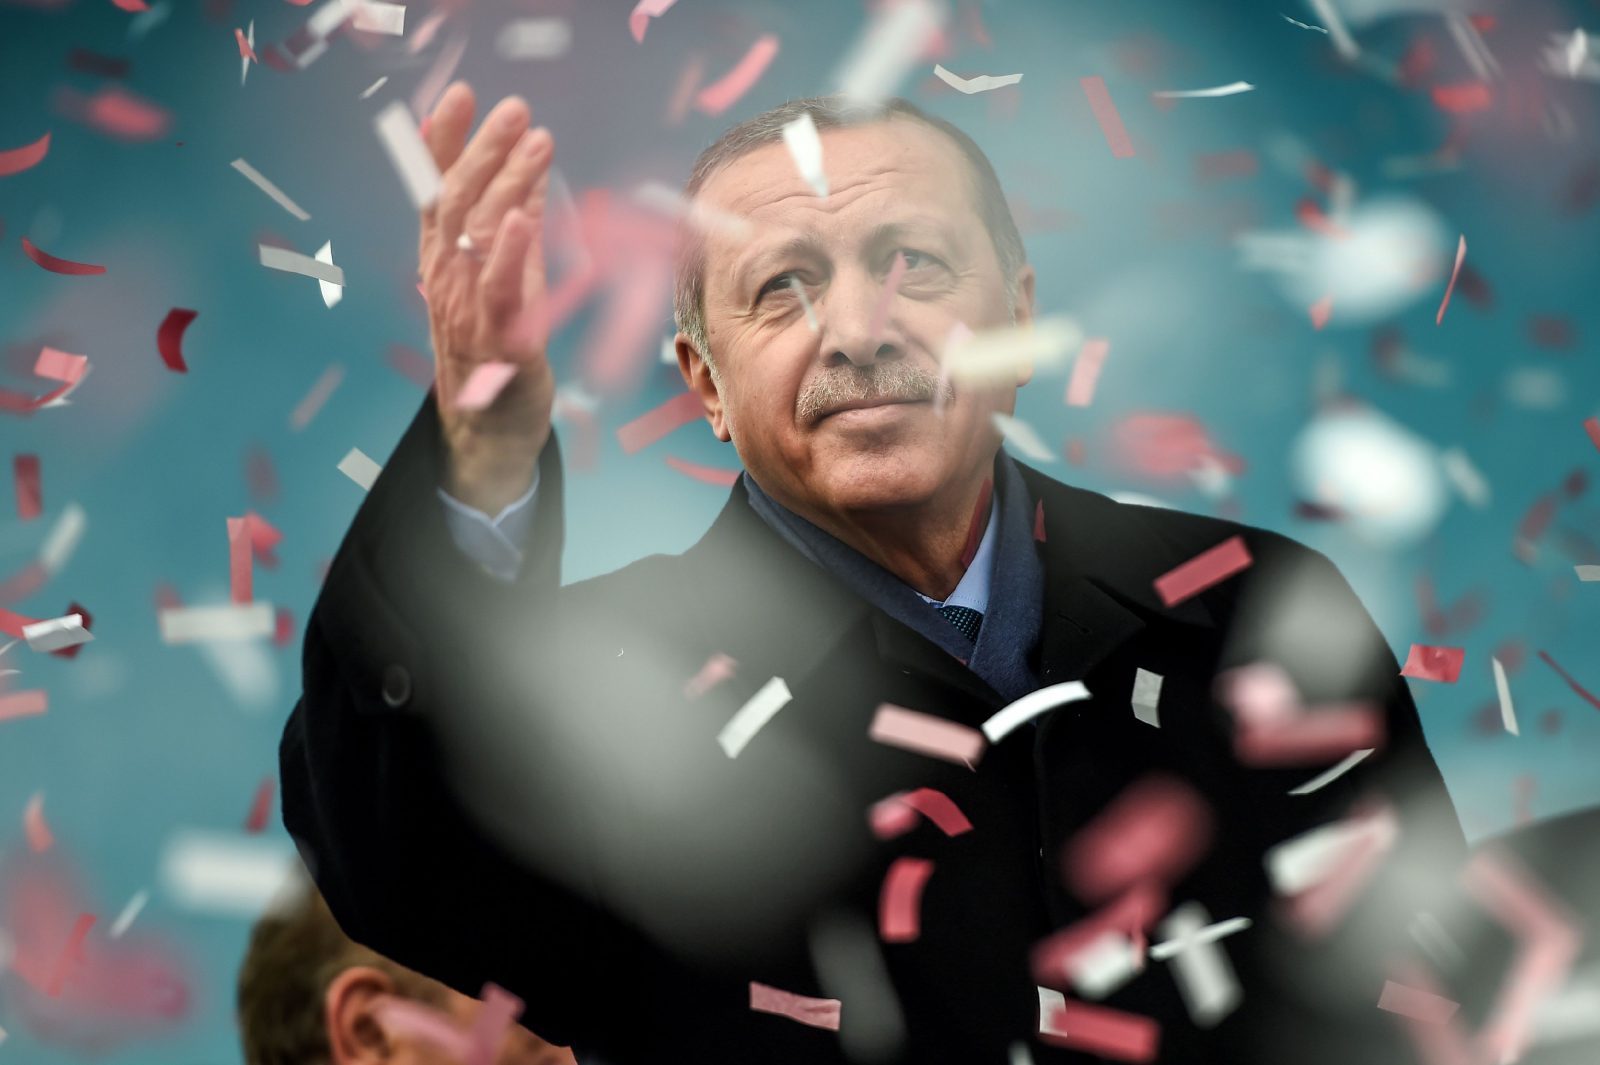 TOPSHOT - Turkish President Recep Tayyip Erdogan gestures amid confetti during a rally in Istanbul on March 11, 2017.  Erdogan threatened to retaliate after the Netherlands banned the foreign minister from flying in for a campaign rally, as he said The Hague's behaviour was reminiscent of Nazism. Turkish politicians are keen to harness votes of the Turkish community in Europe ahead of the April 16 referendum on whether to boost Erdogan's powers. / AFP PHOTO / OZAN KOSE        (Photo credit should read OZAN KOSE/AFP/Getty Images)